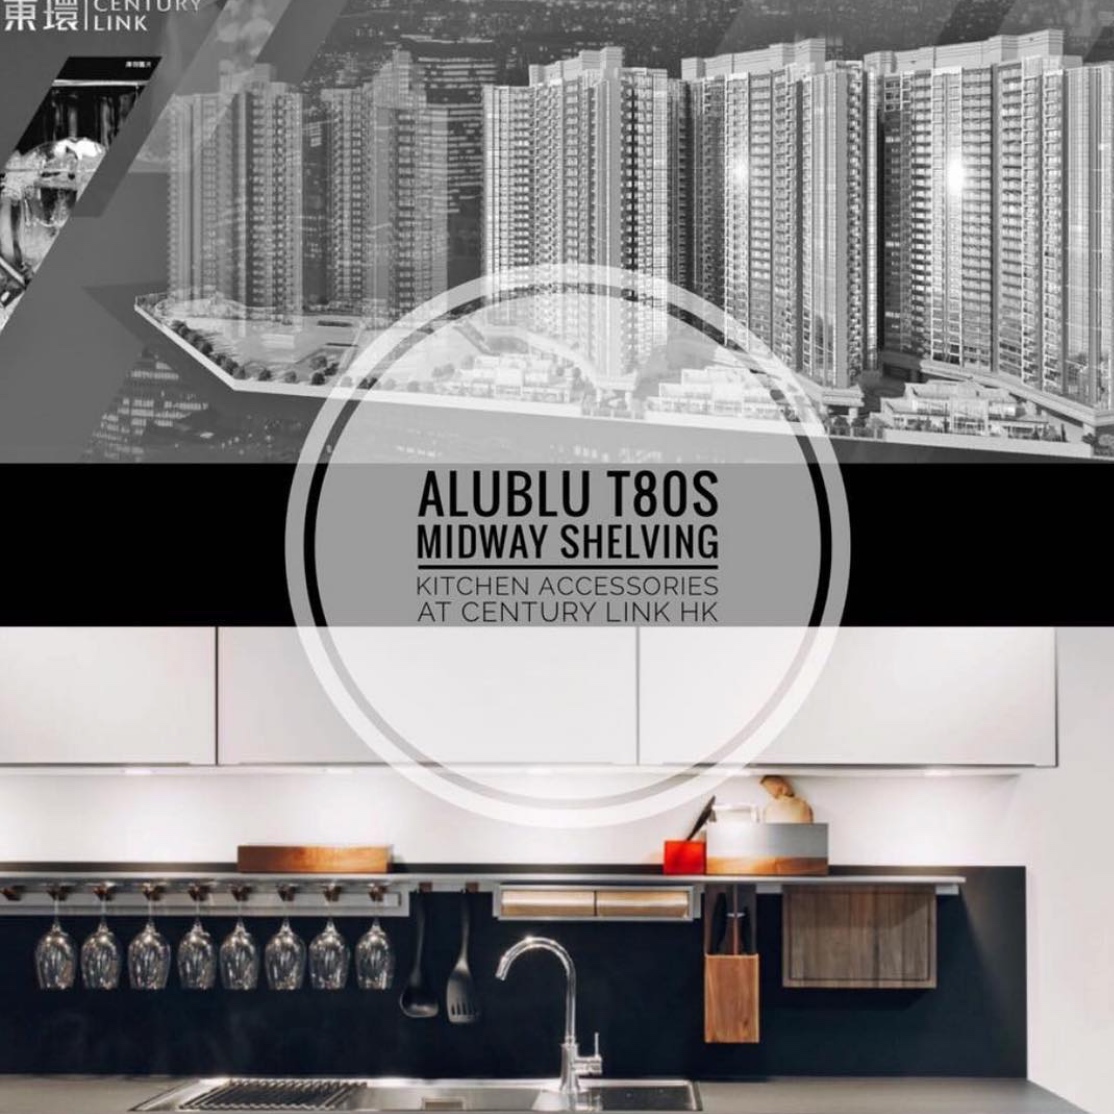 AluBlu TS Midway Shelving at Century Link HK